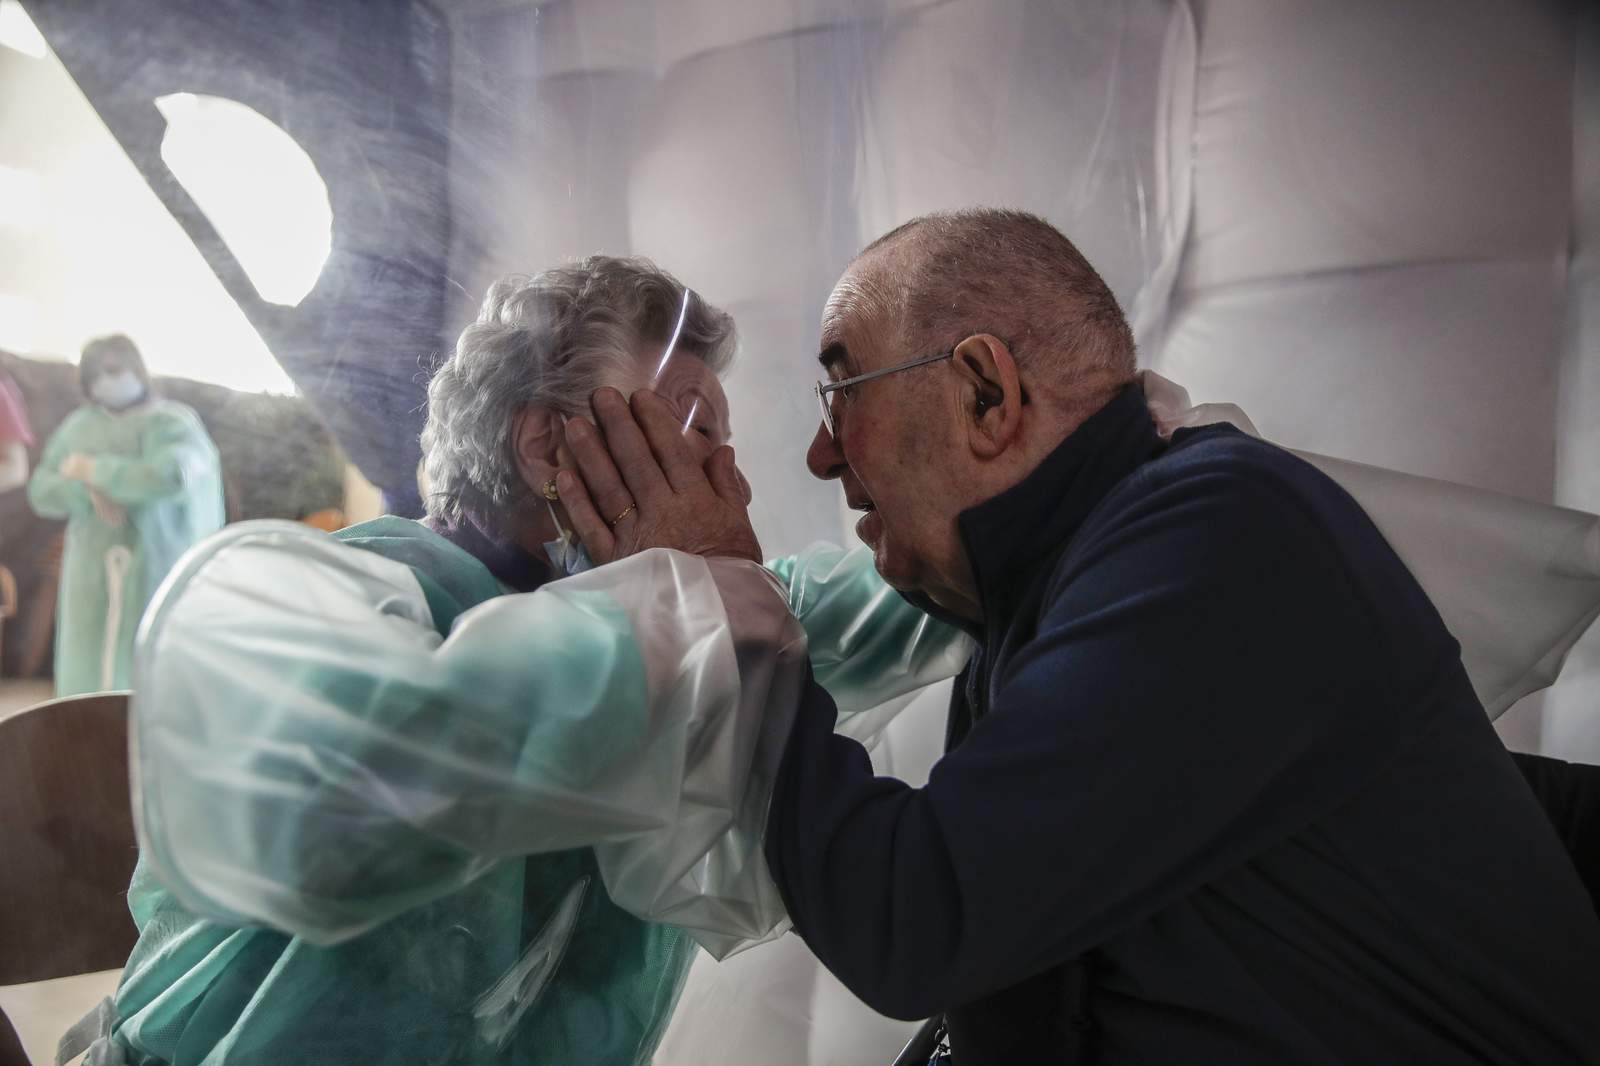 Hands touch: Italy's nursing homes emerge from COVID tunnel